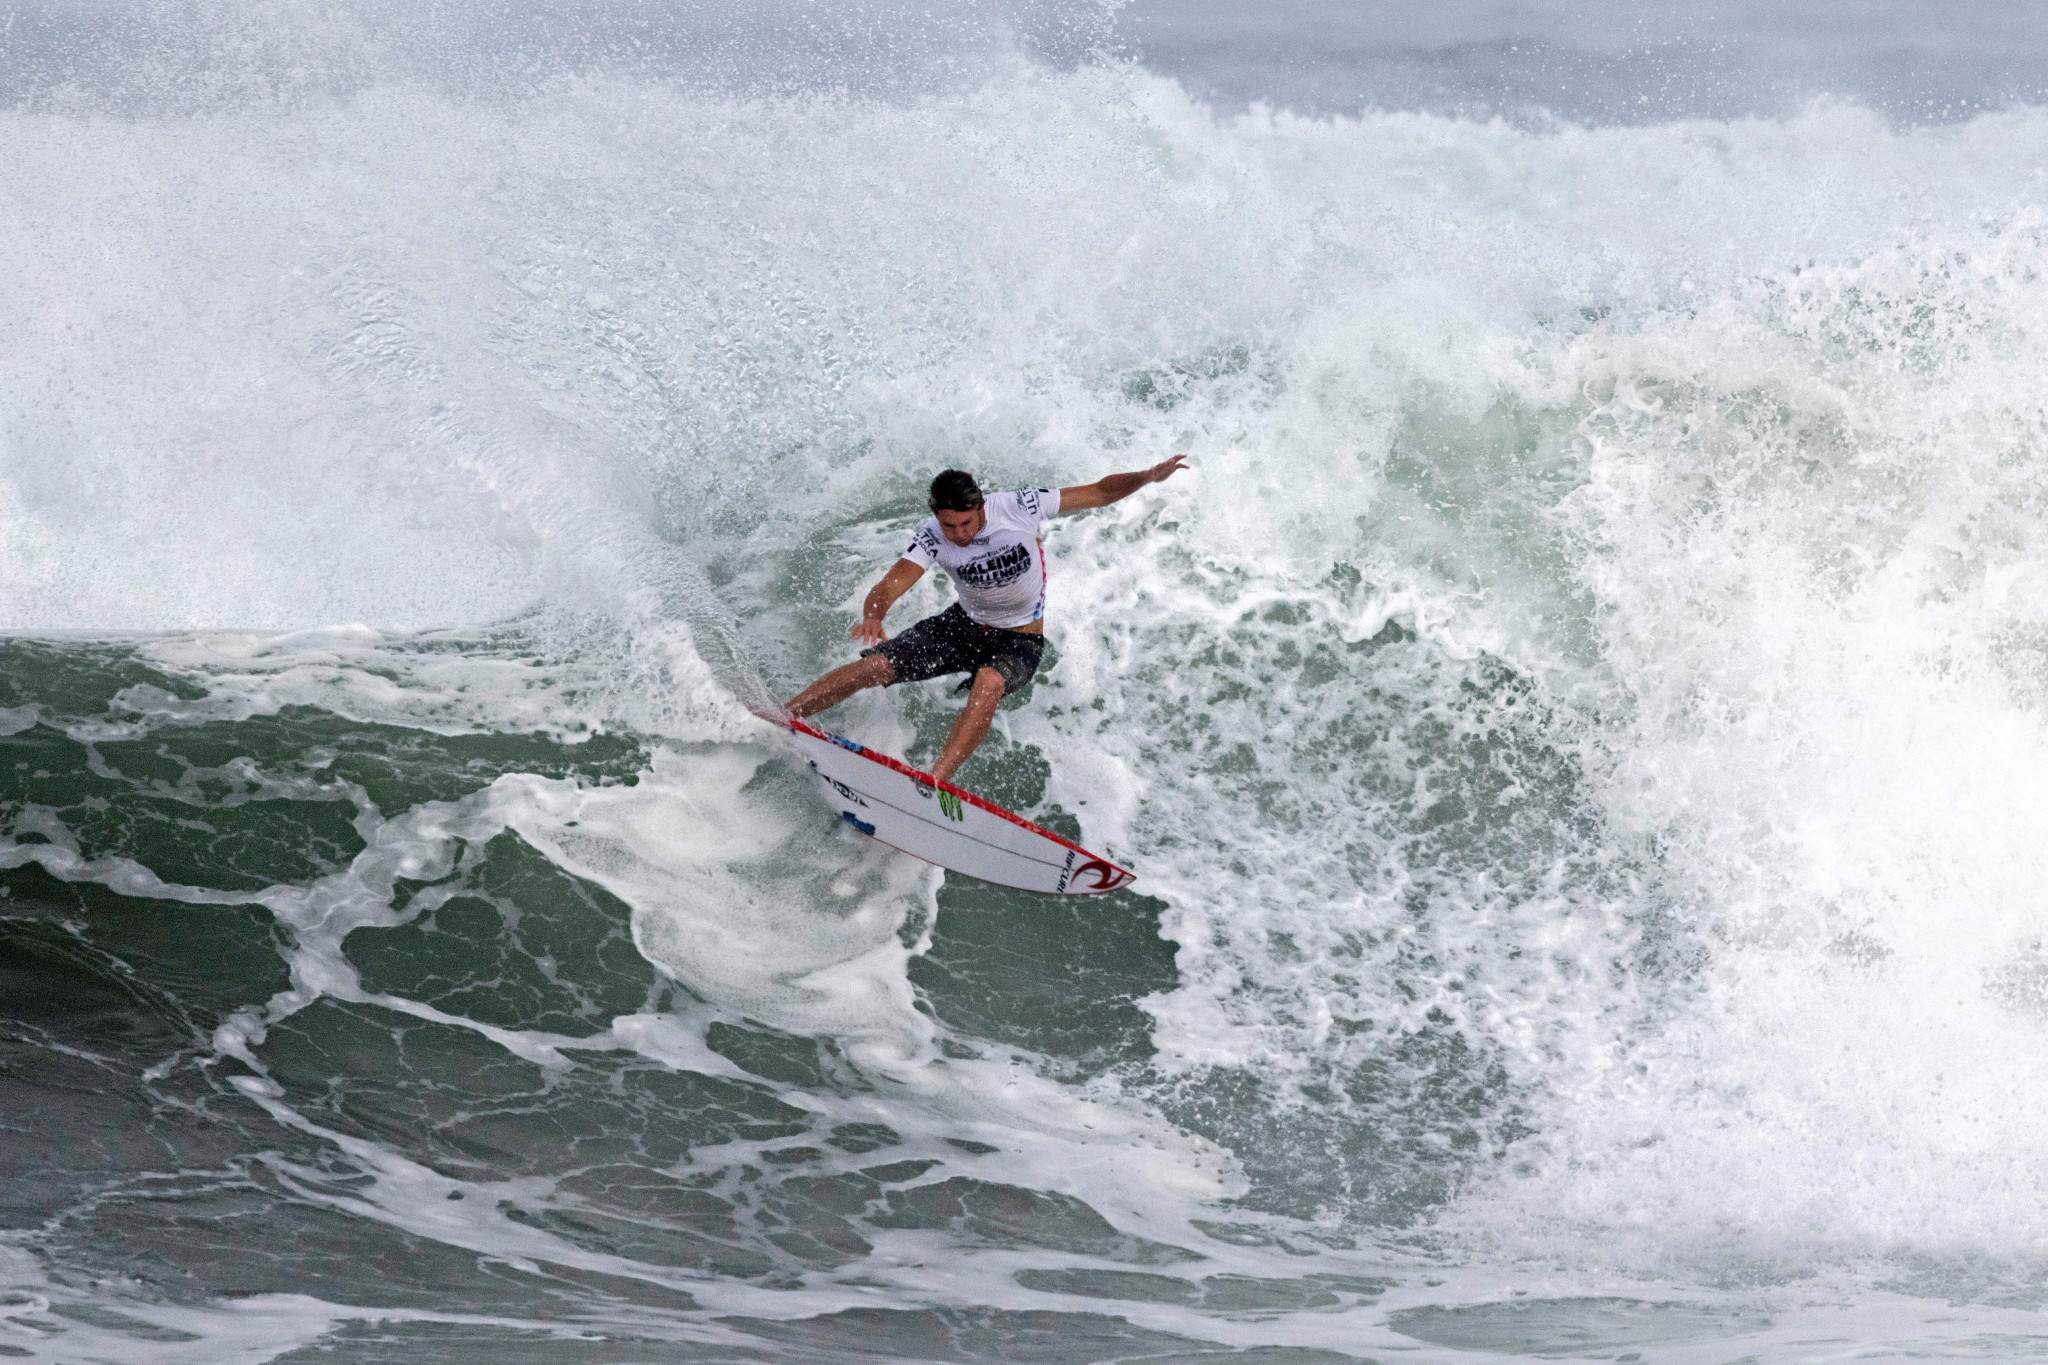 The United States' Griffin Colapinto earned his first WSL Championship Tour win in Peniche ©Getty Images